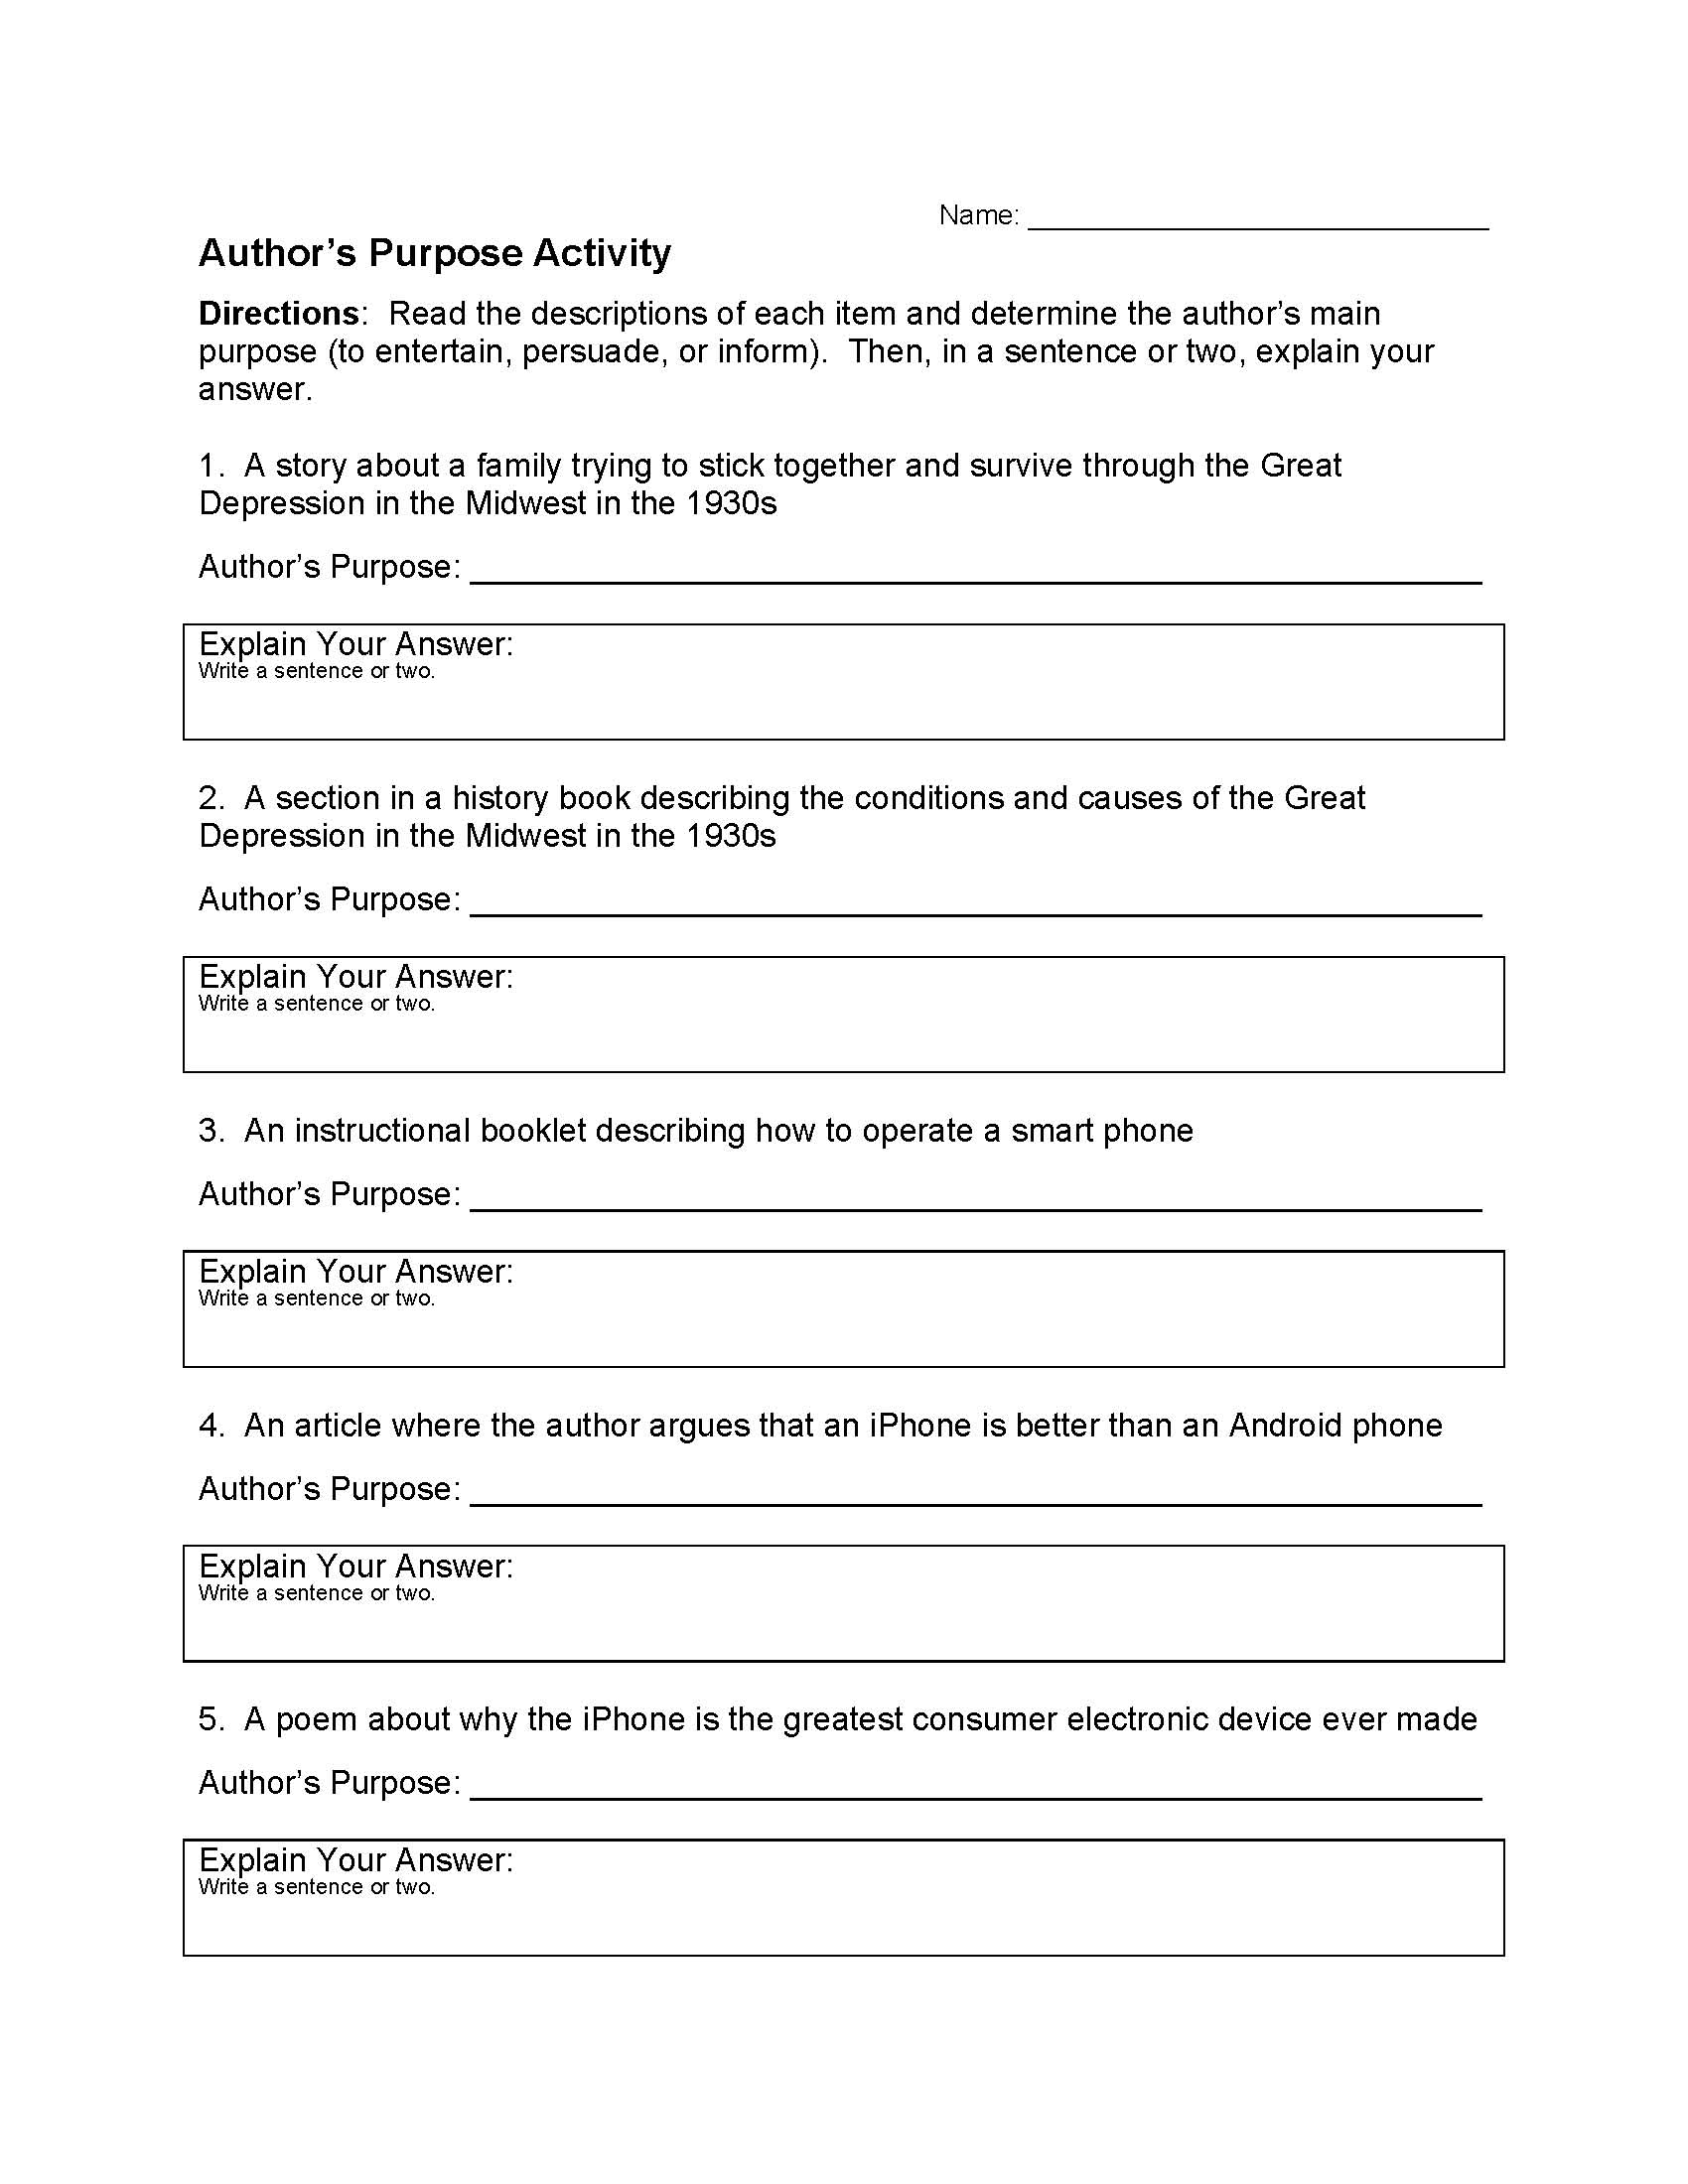 Author s Purpose Worksheet 1 Preview